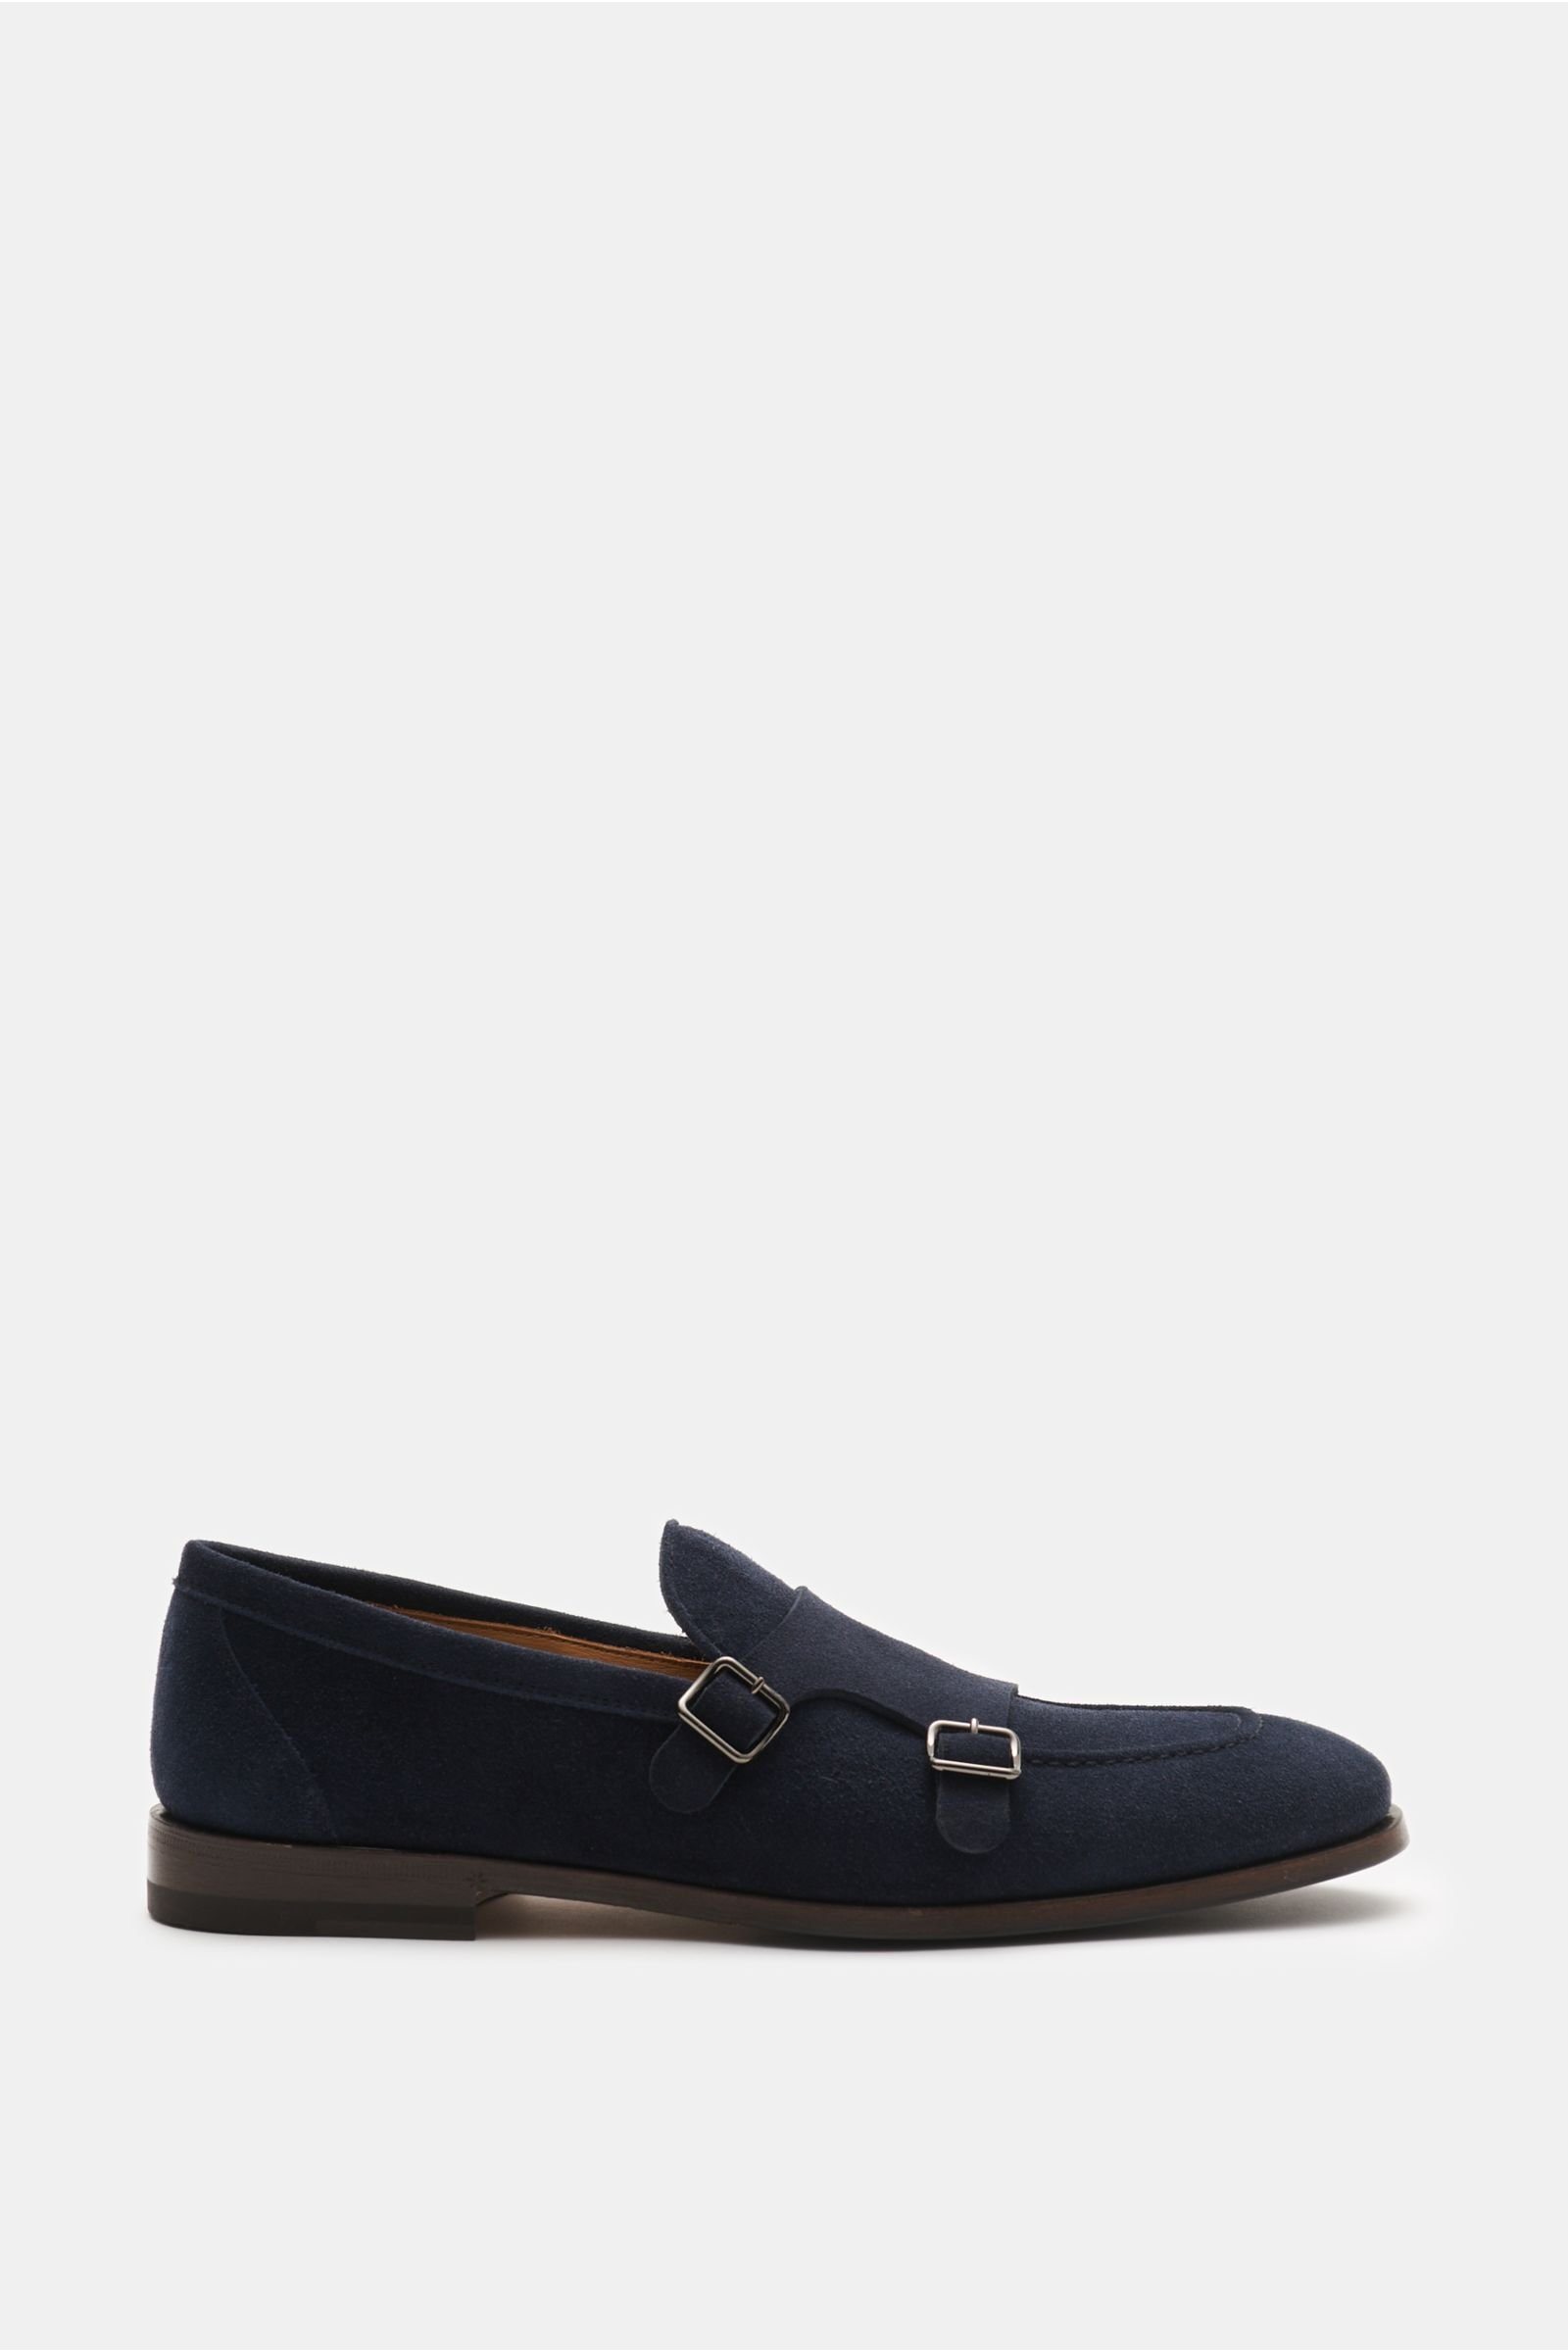 Double monk shoes navy 